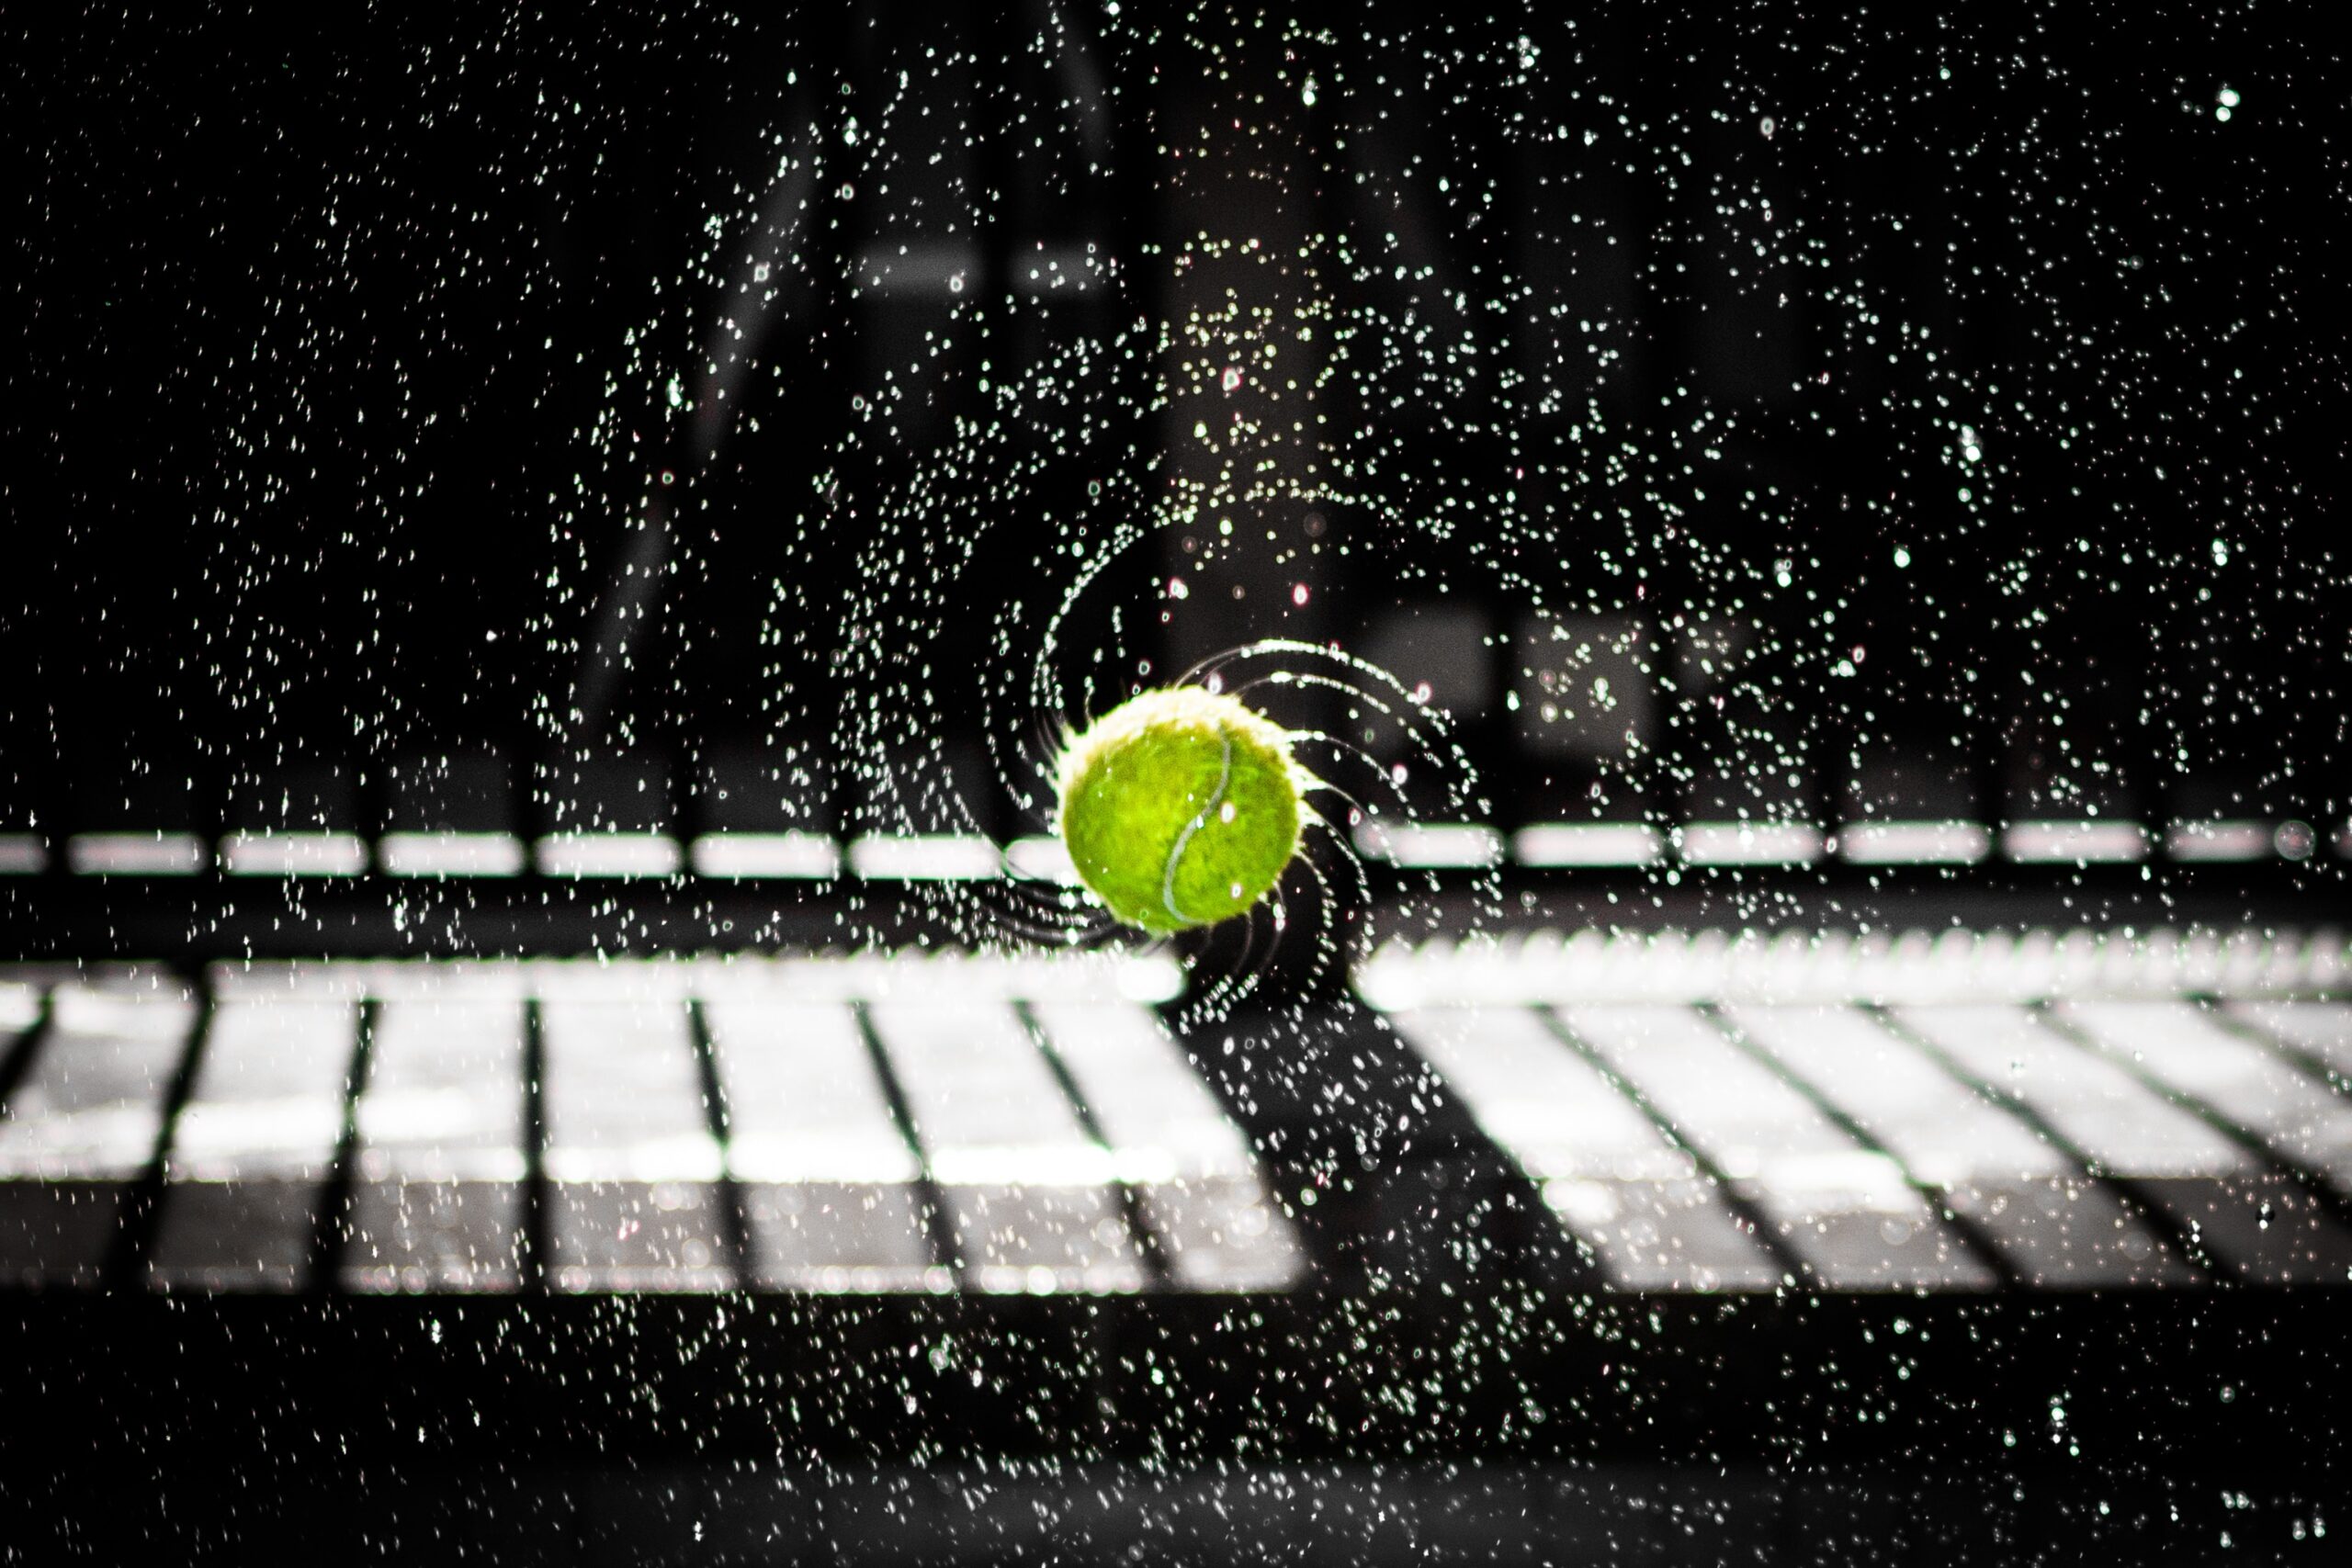 Tennis Whites - a spinning wet tennis ball trails droplets of water off its surface in perfect spirals